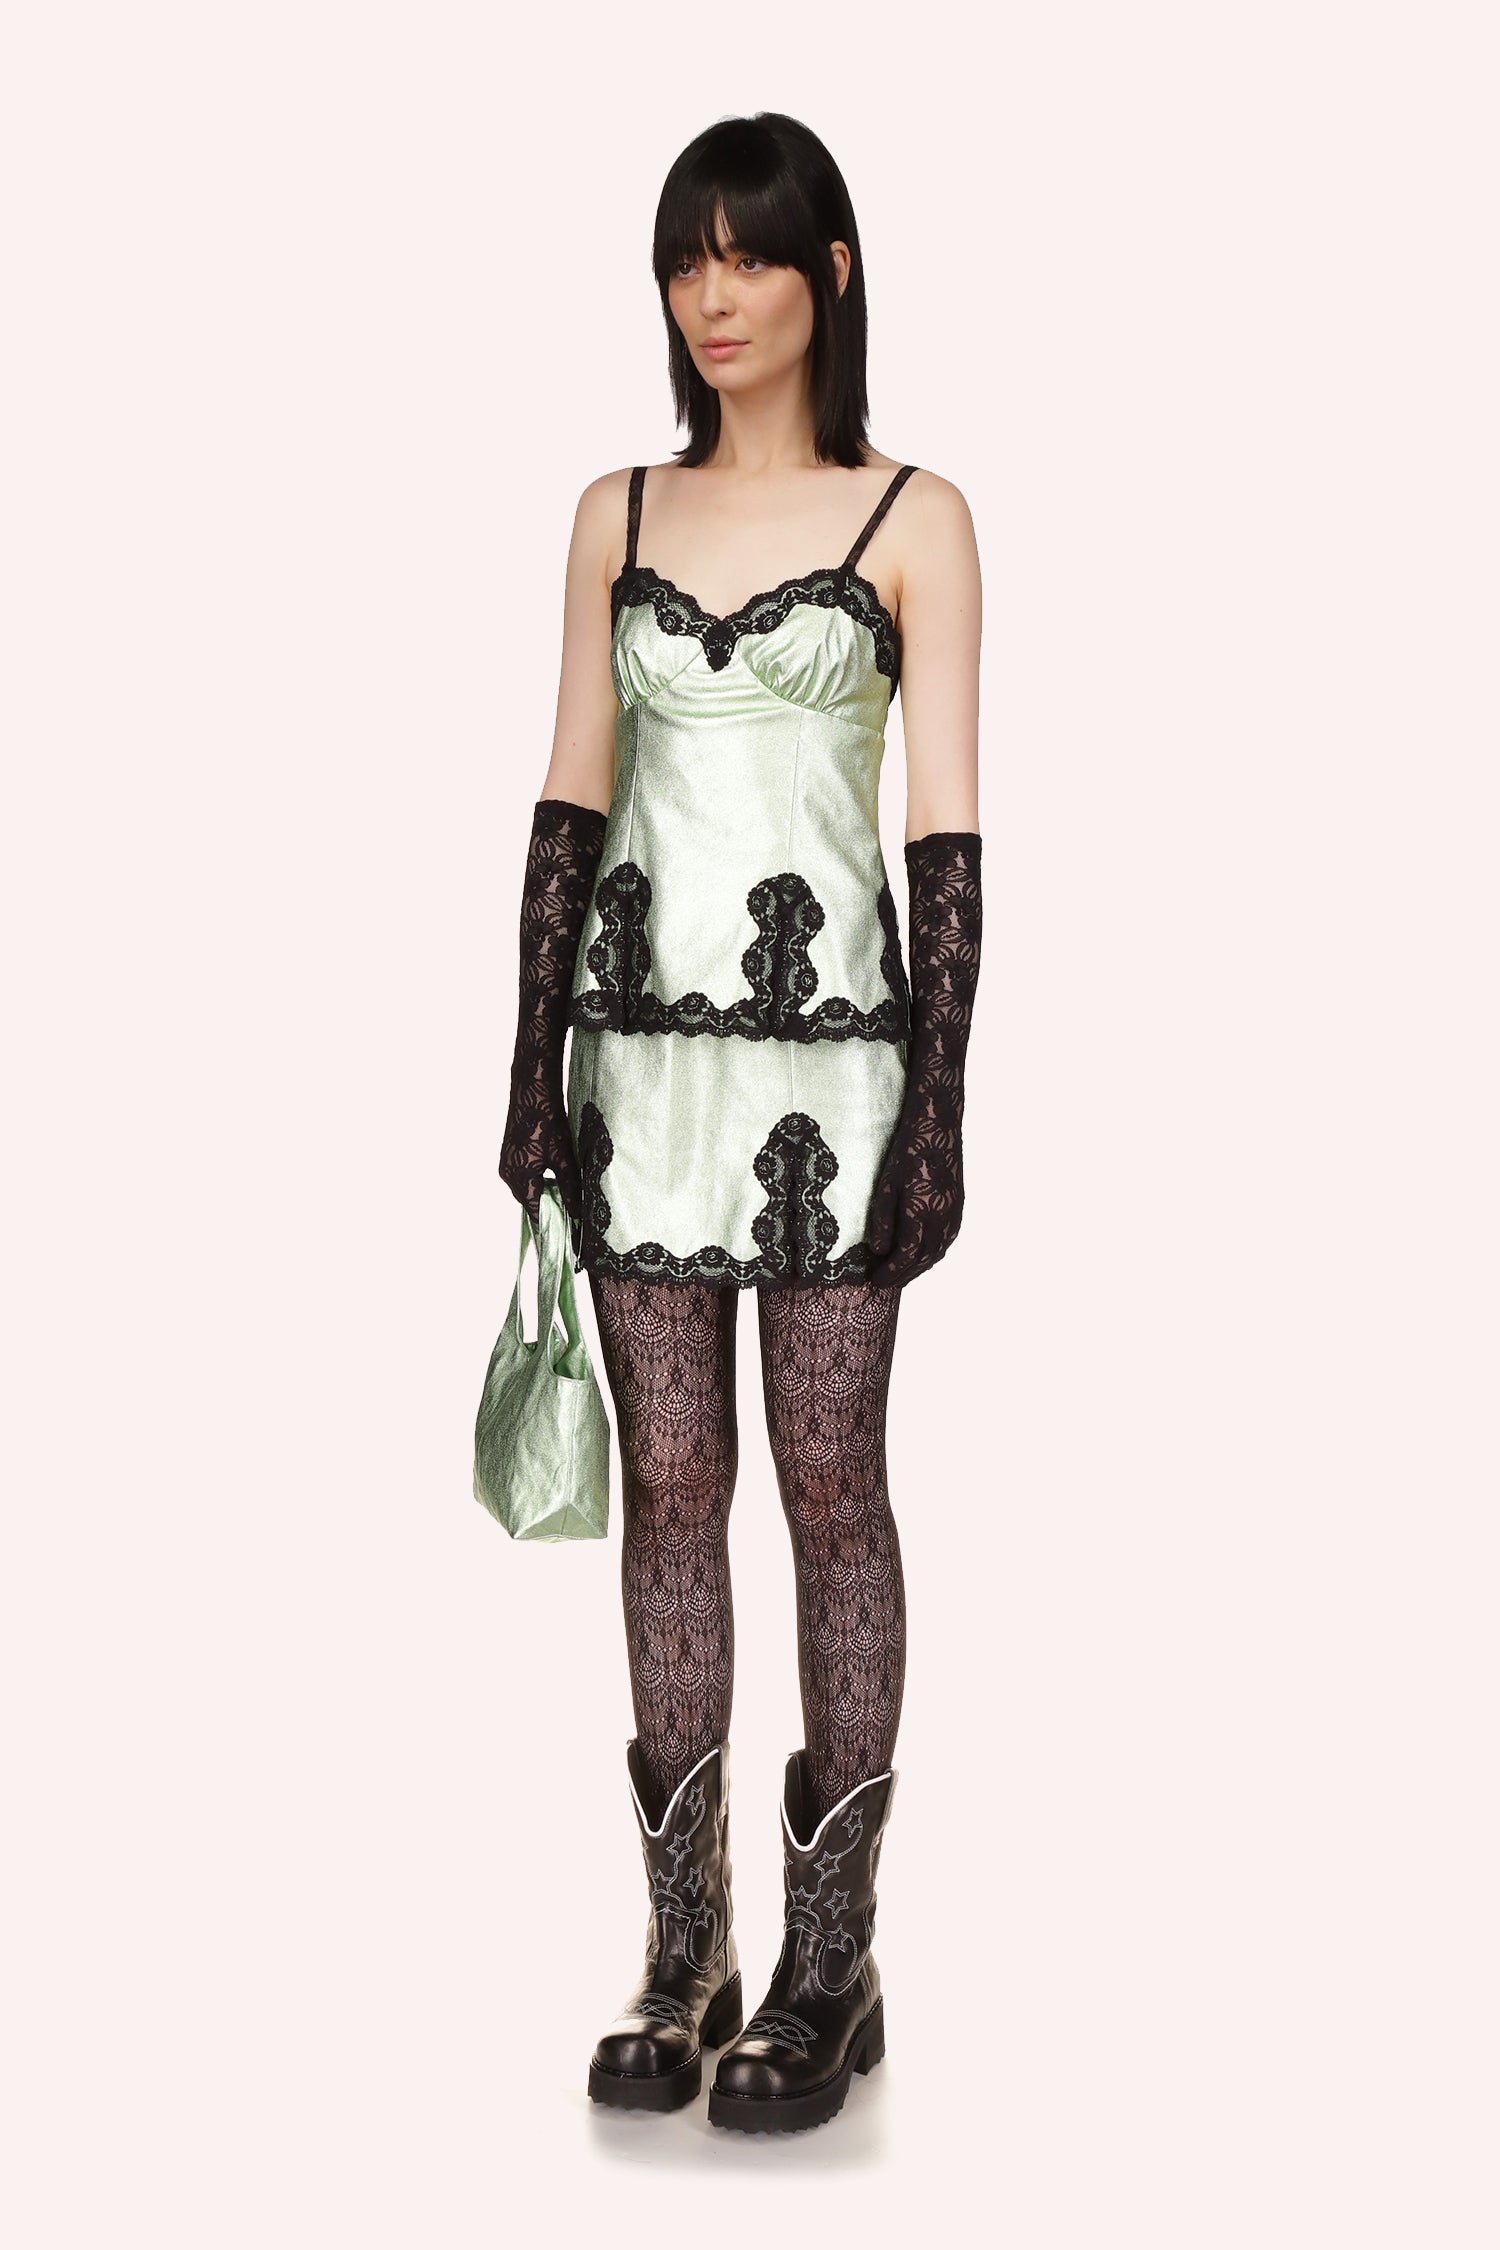 Anna Sui's Camisole Top Peppermint, sleeveless, with black straps over the shoulders, black lace around the top and bottom